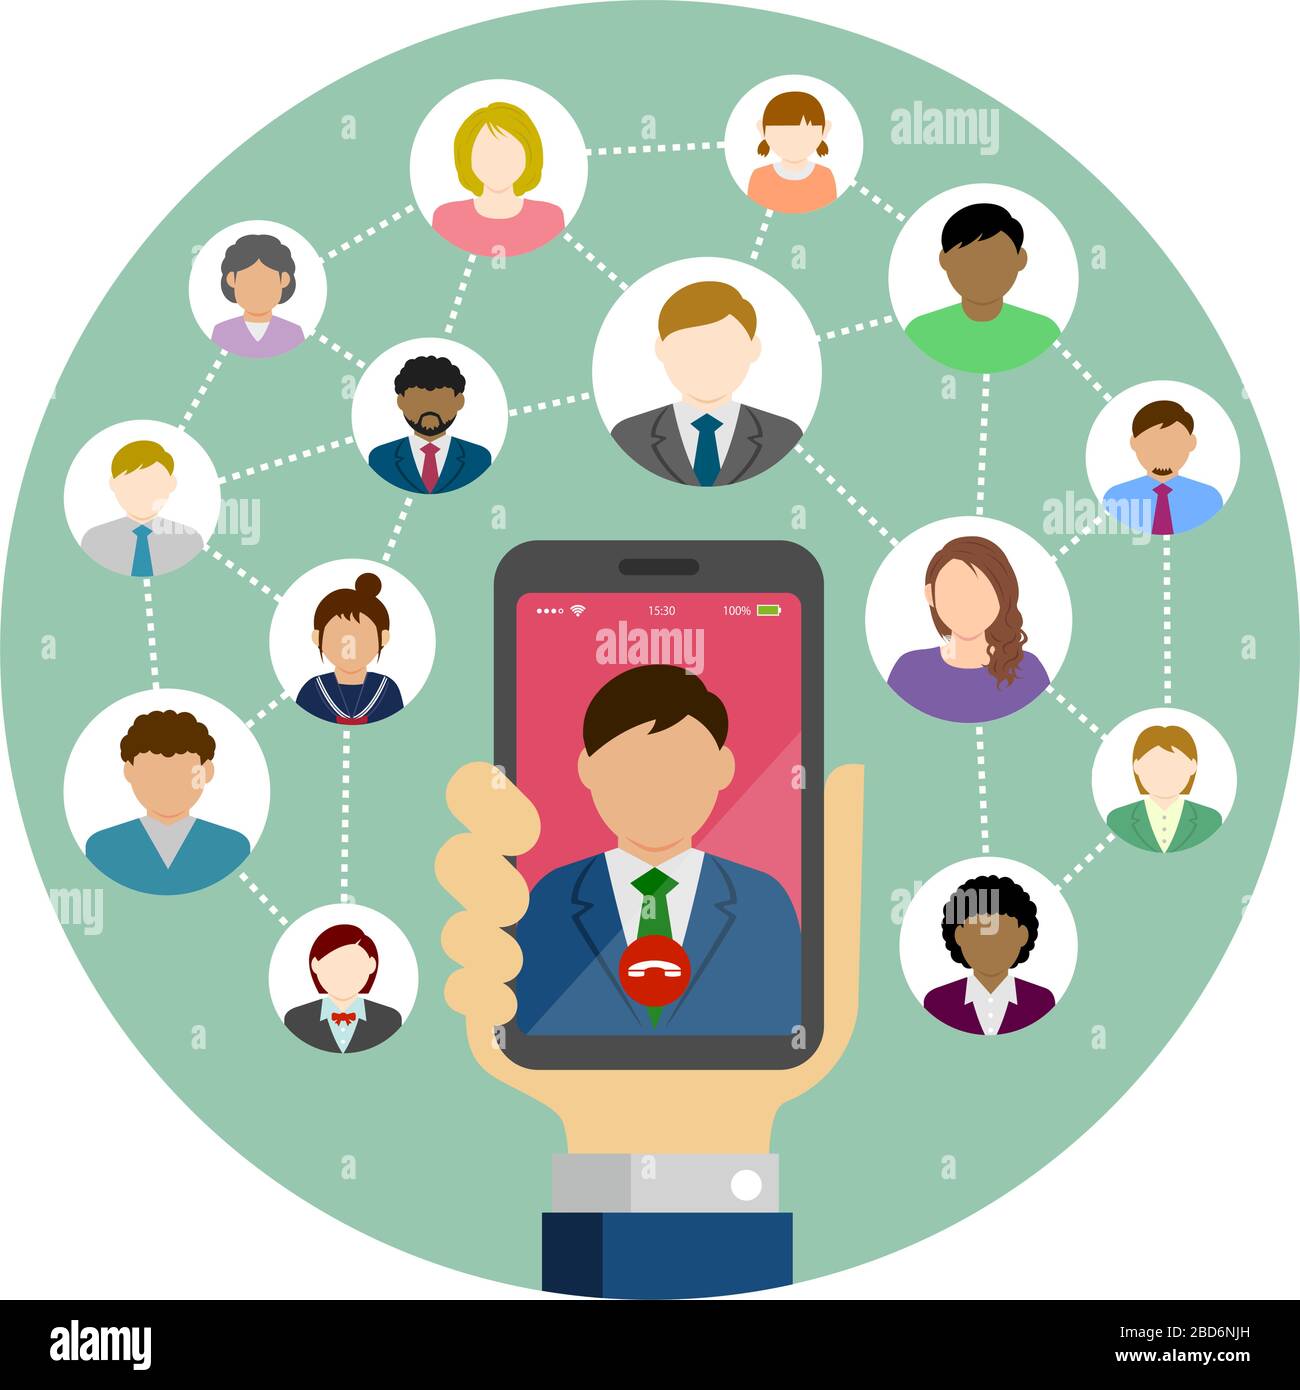 Video call / Global communiation through mobile phone circle vector banner illustration / Hand holding smartphone. Stock Vector